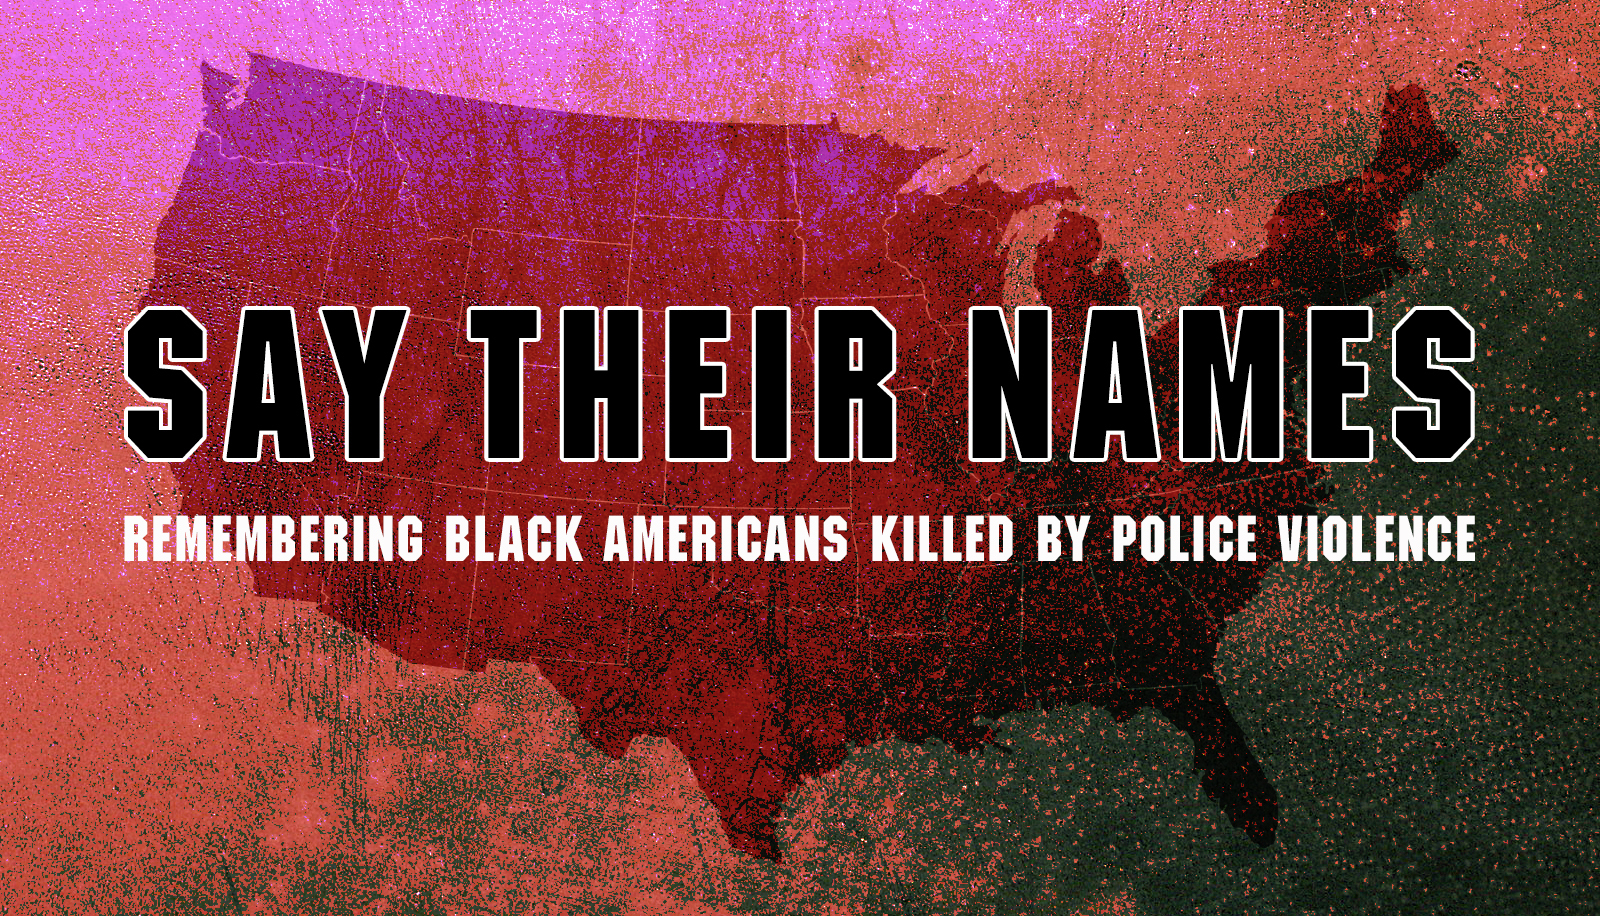 SAY THEIR NAMES: Remembering Black Americans Killed by Police Violence